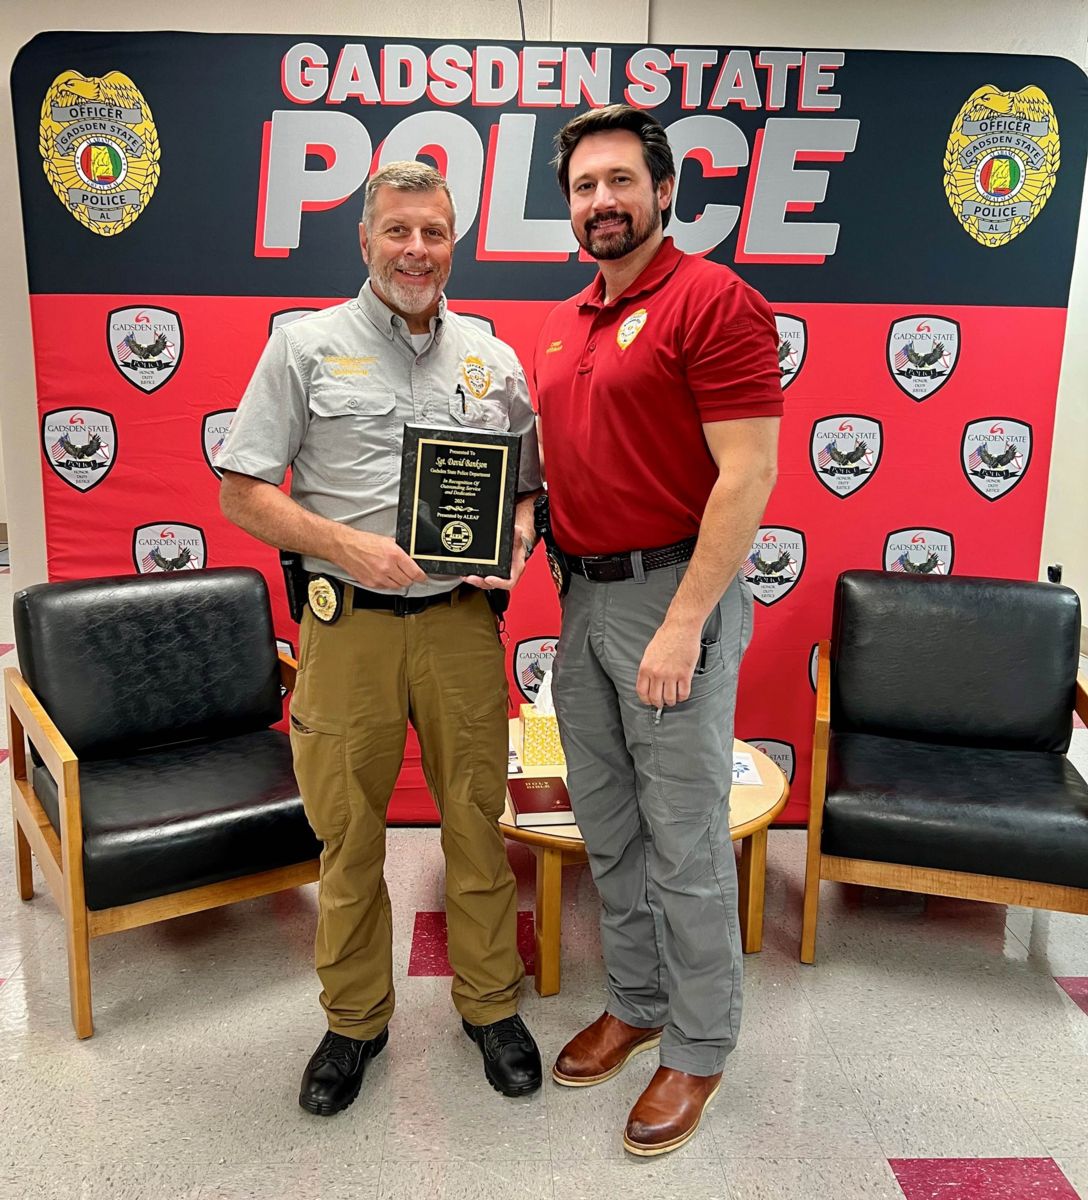 Sgt. David Bankston with Gadsden State Police Chief Jay Freeman after receiving Police Officer of the Year by the Alabama Law Enforcement Appreciation Foundation